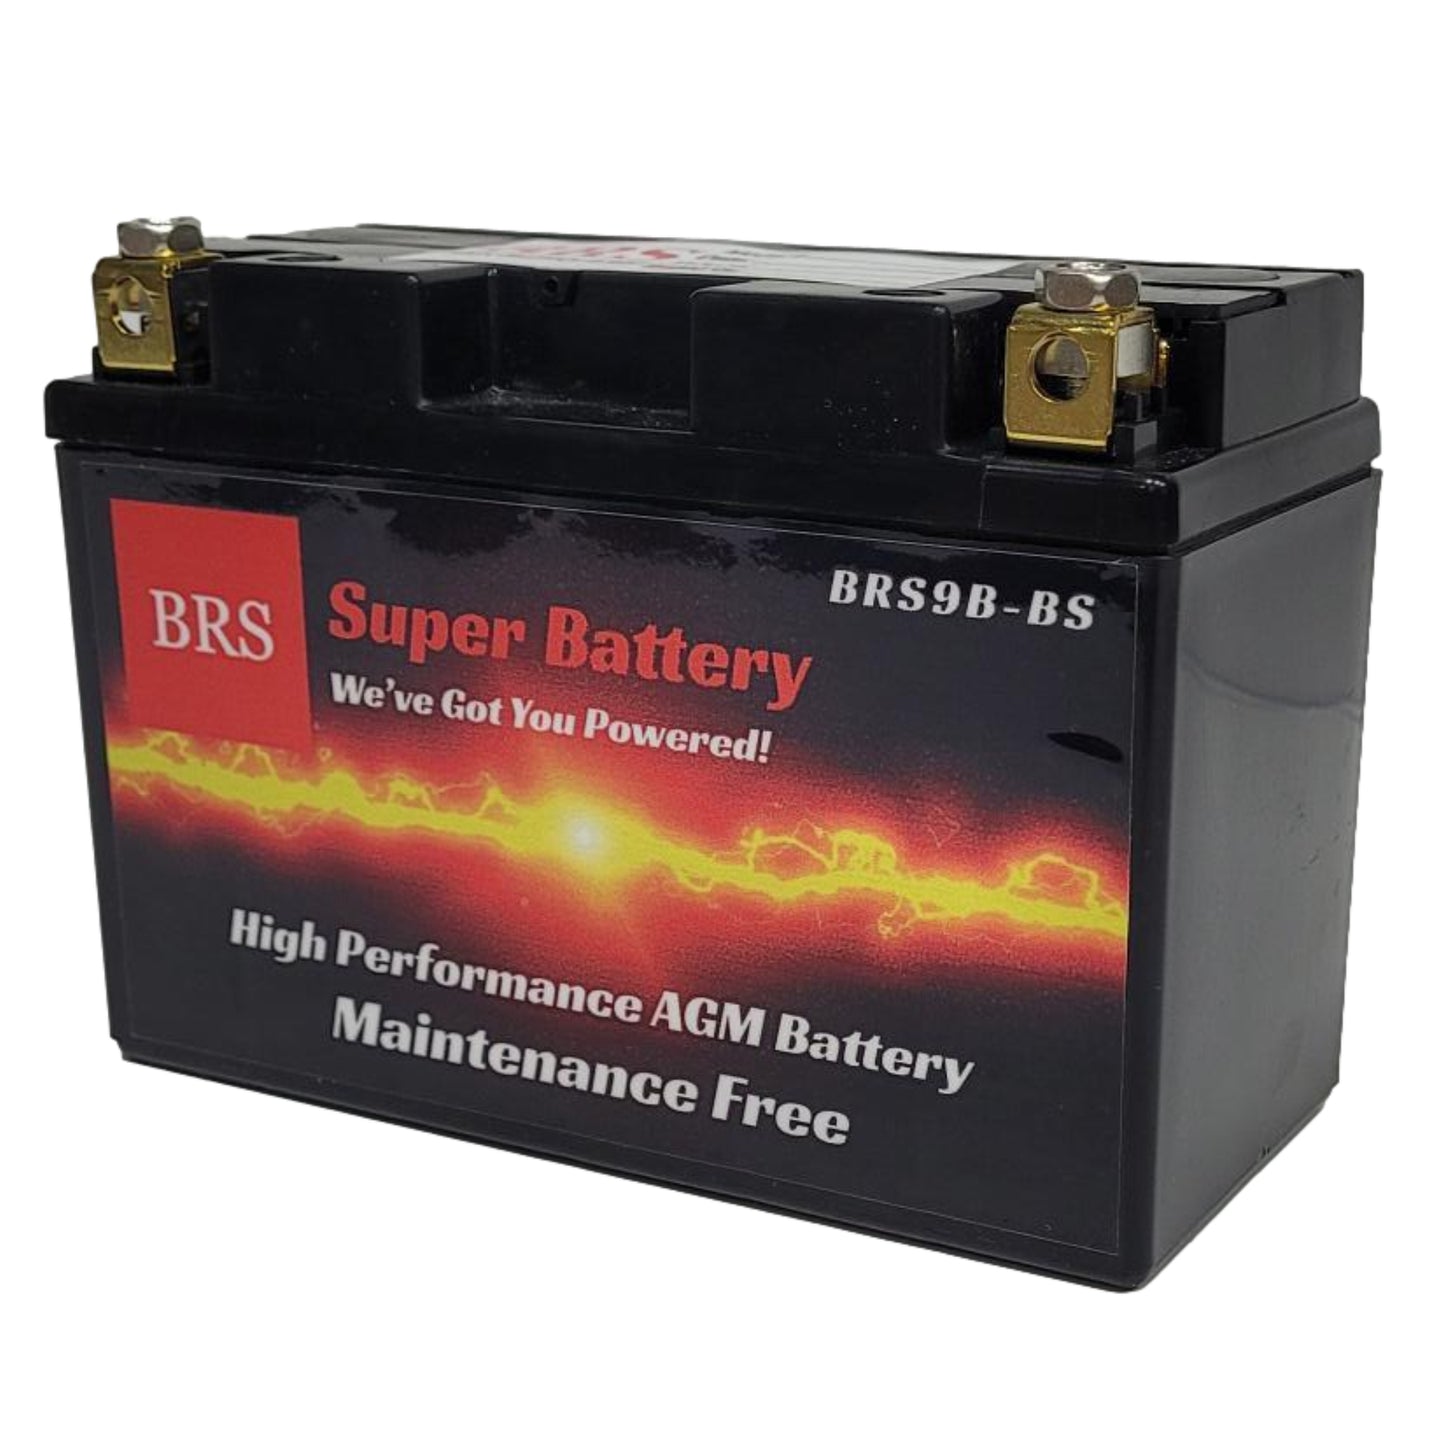 WPX9B-BS 12v High Performance Sealed AGM PowerSport 10 Year Battery - BRS Super Battery